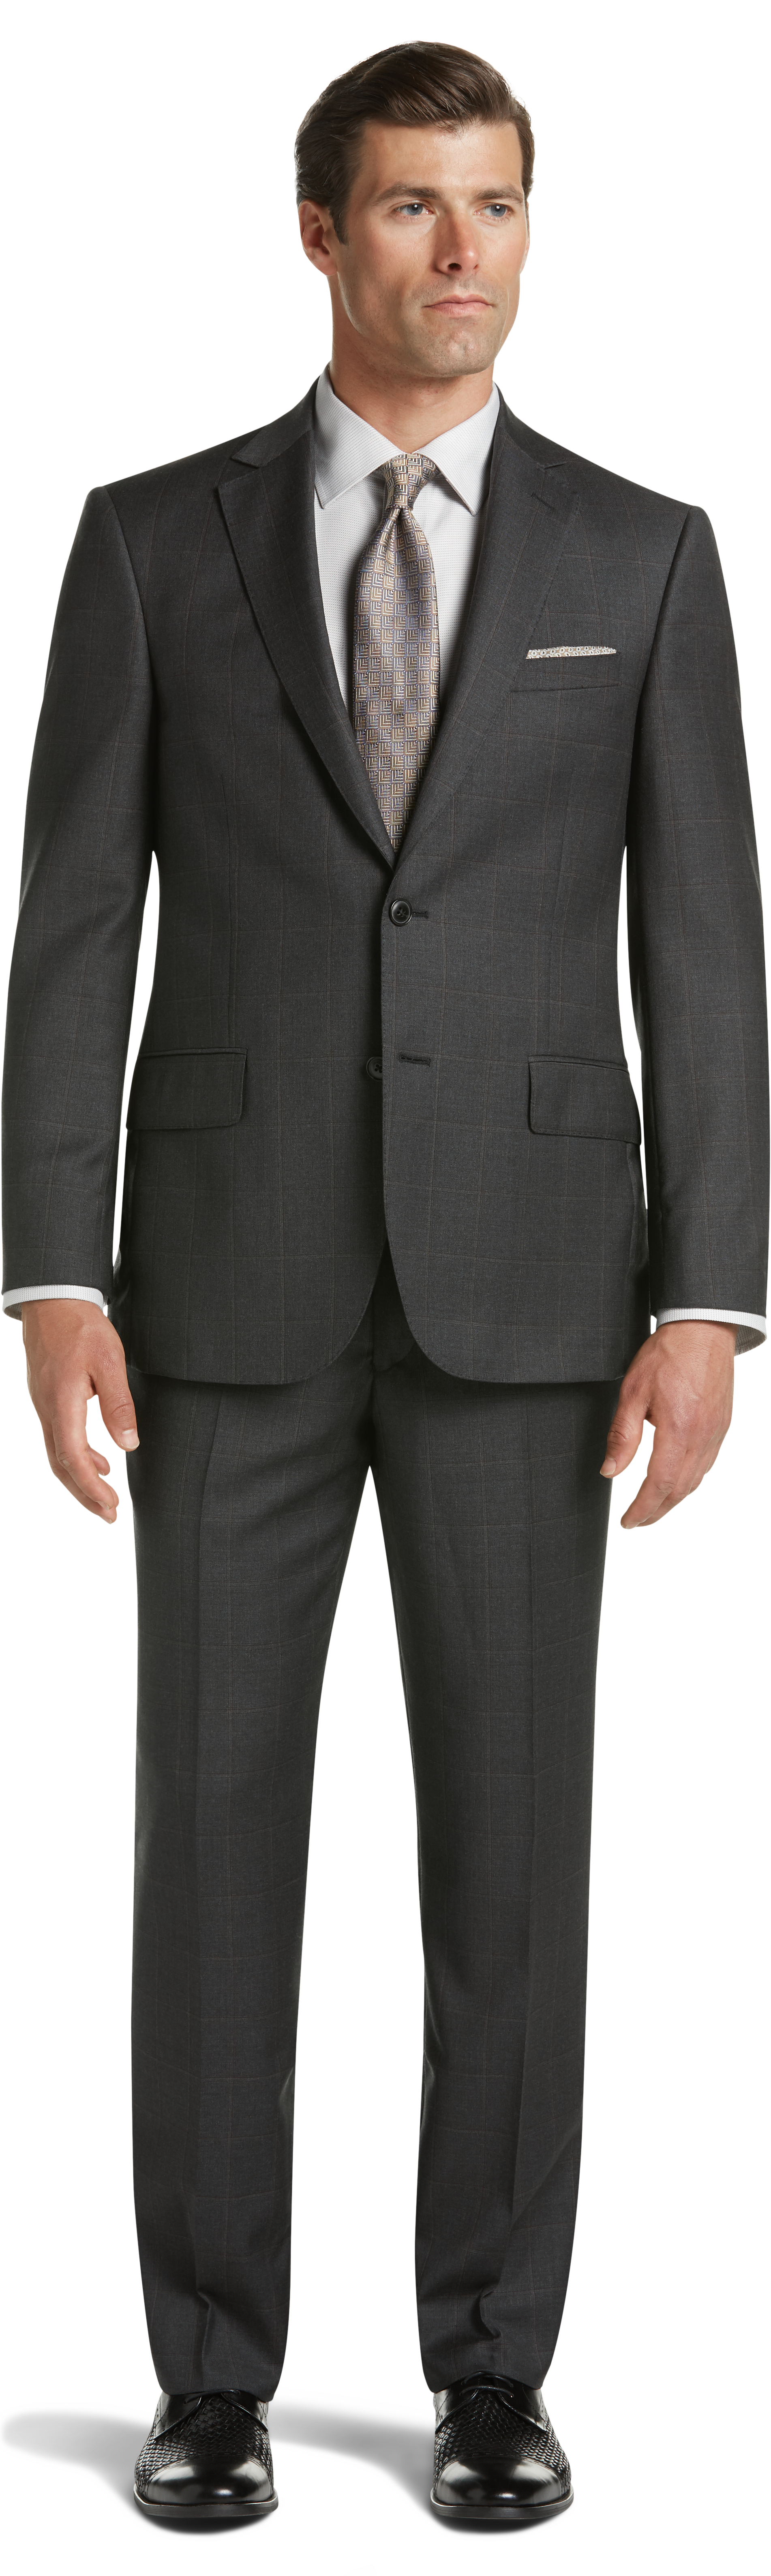 mens suits clearance